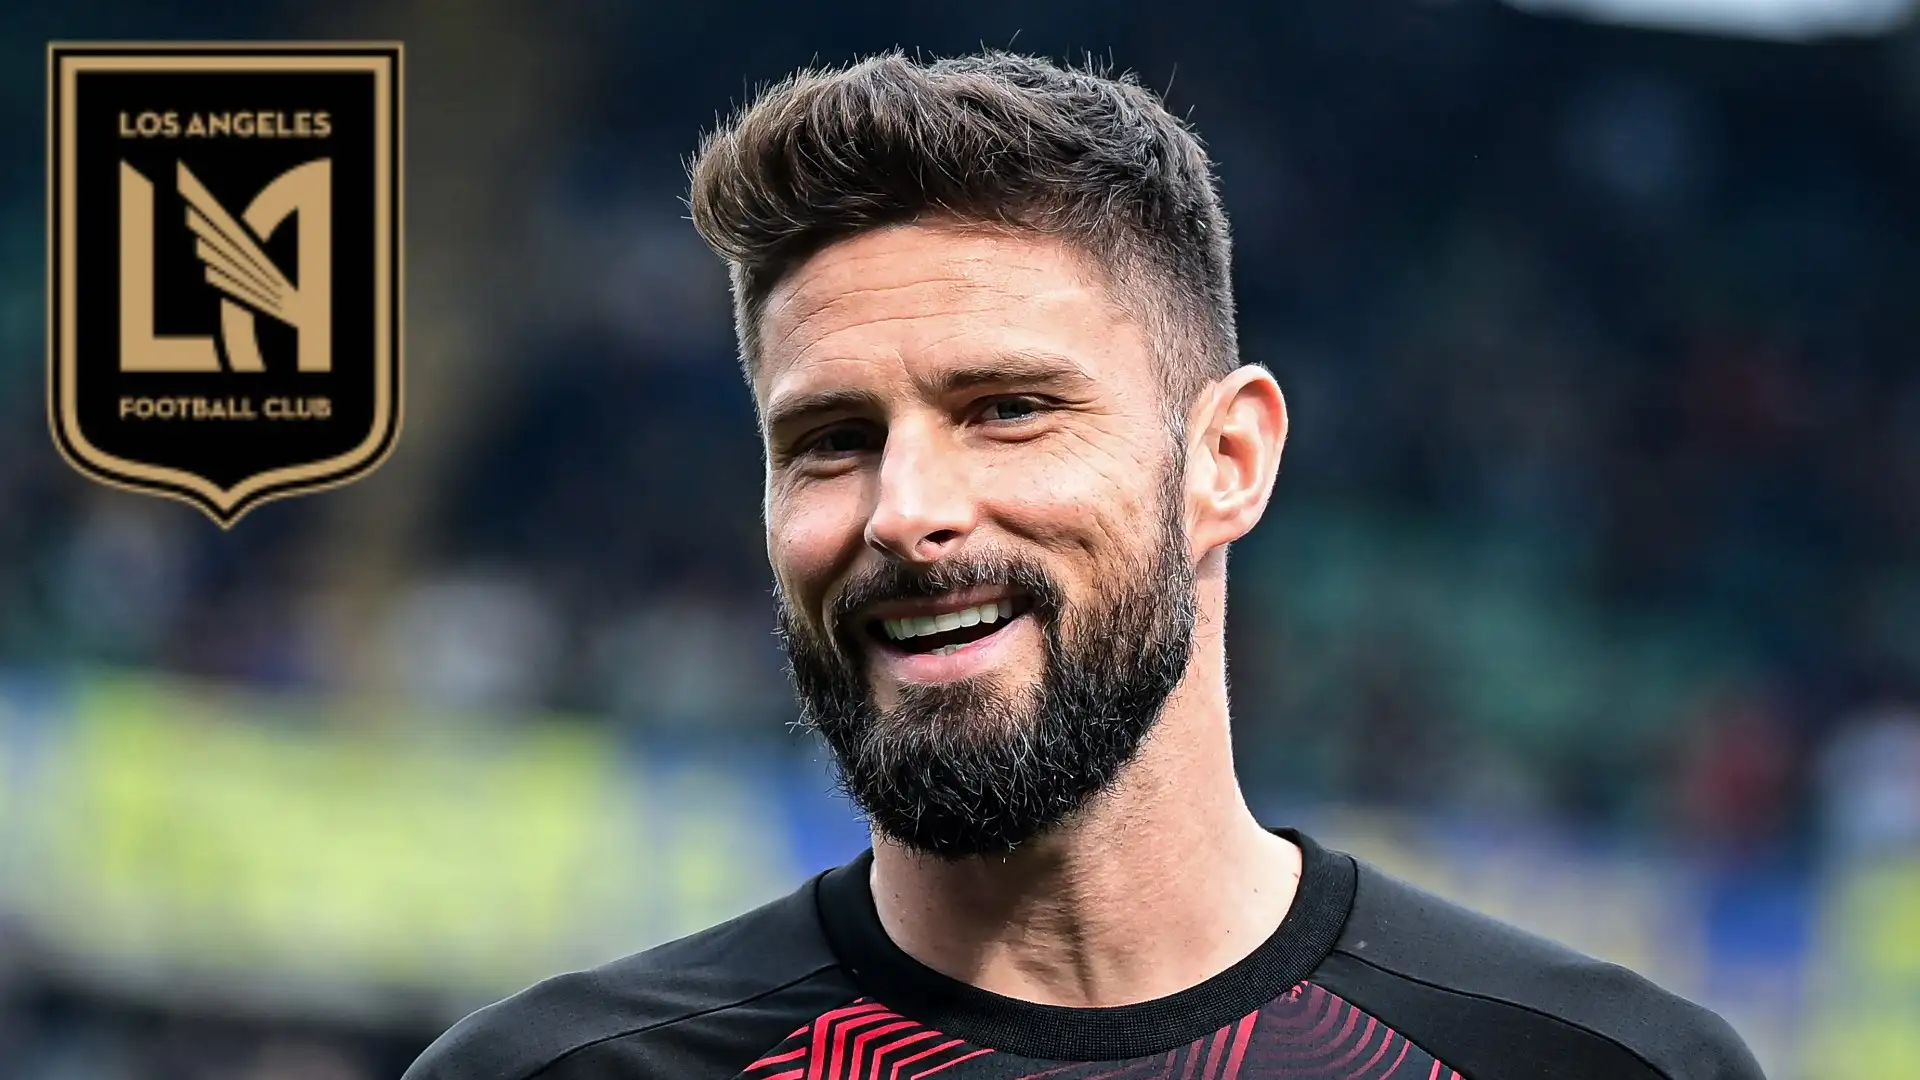 Olivier Giroud confirms he is MLS bound as ex-Arsenal & Chelsea striker announces AC Milan exit in emotional message